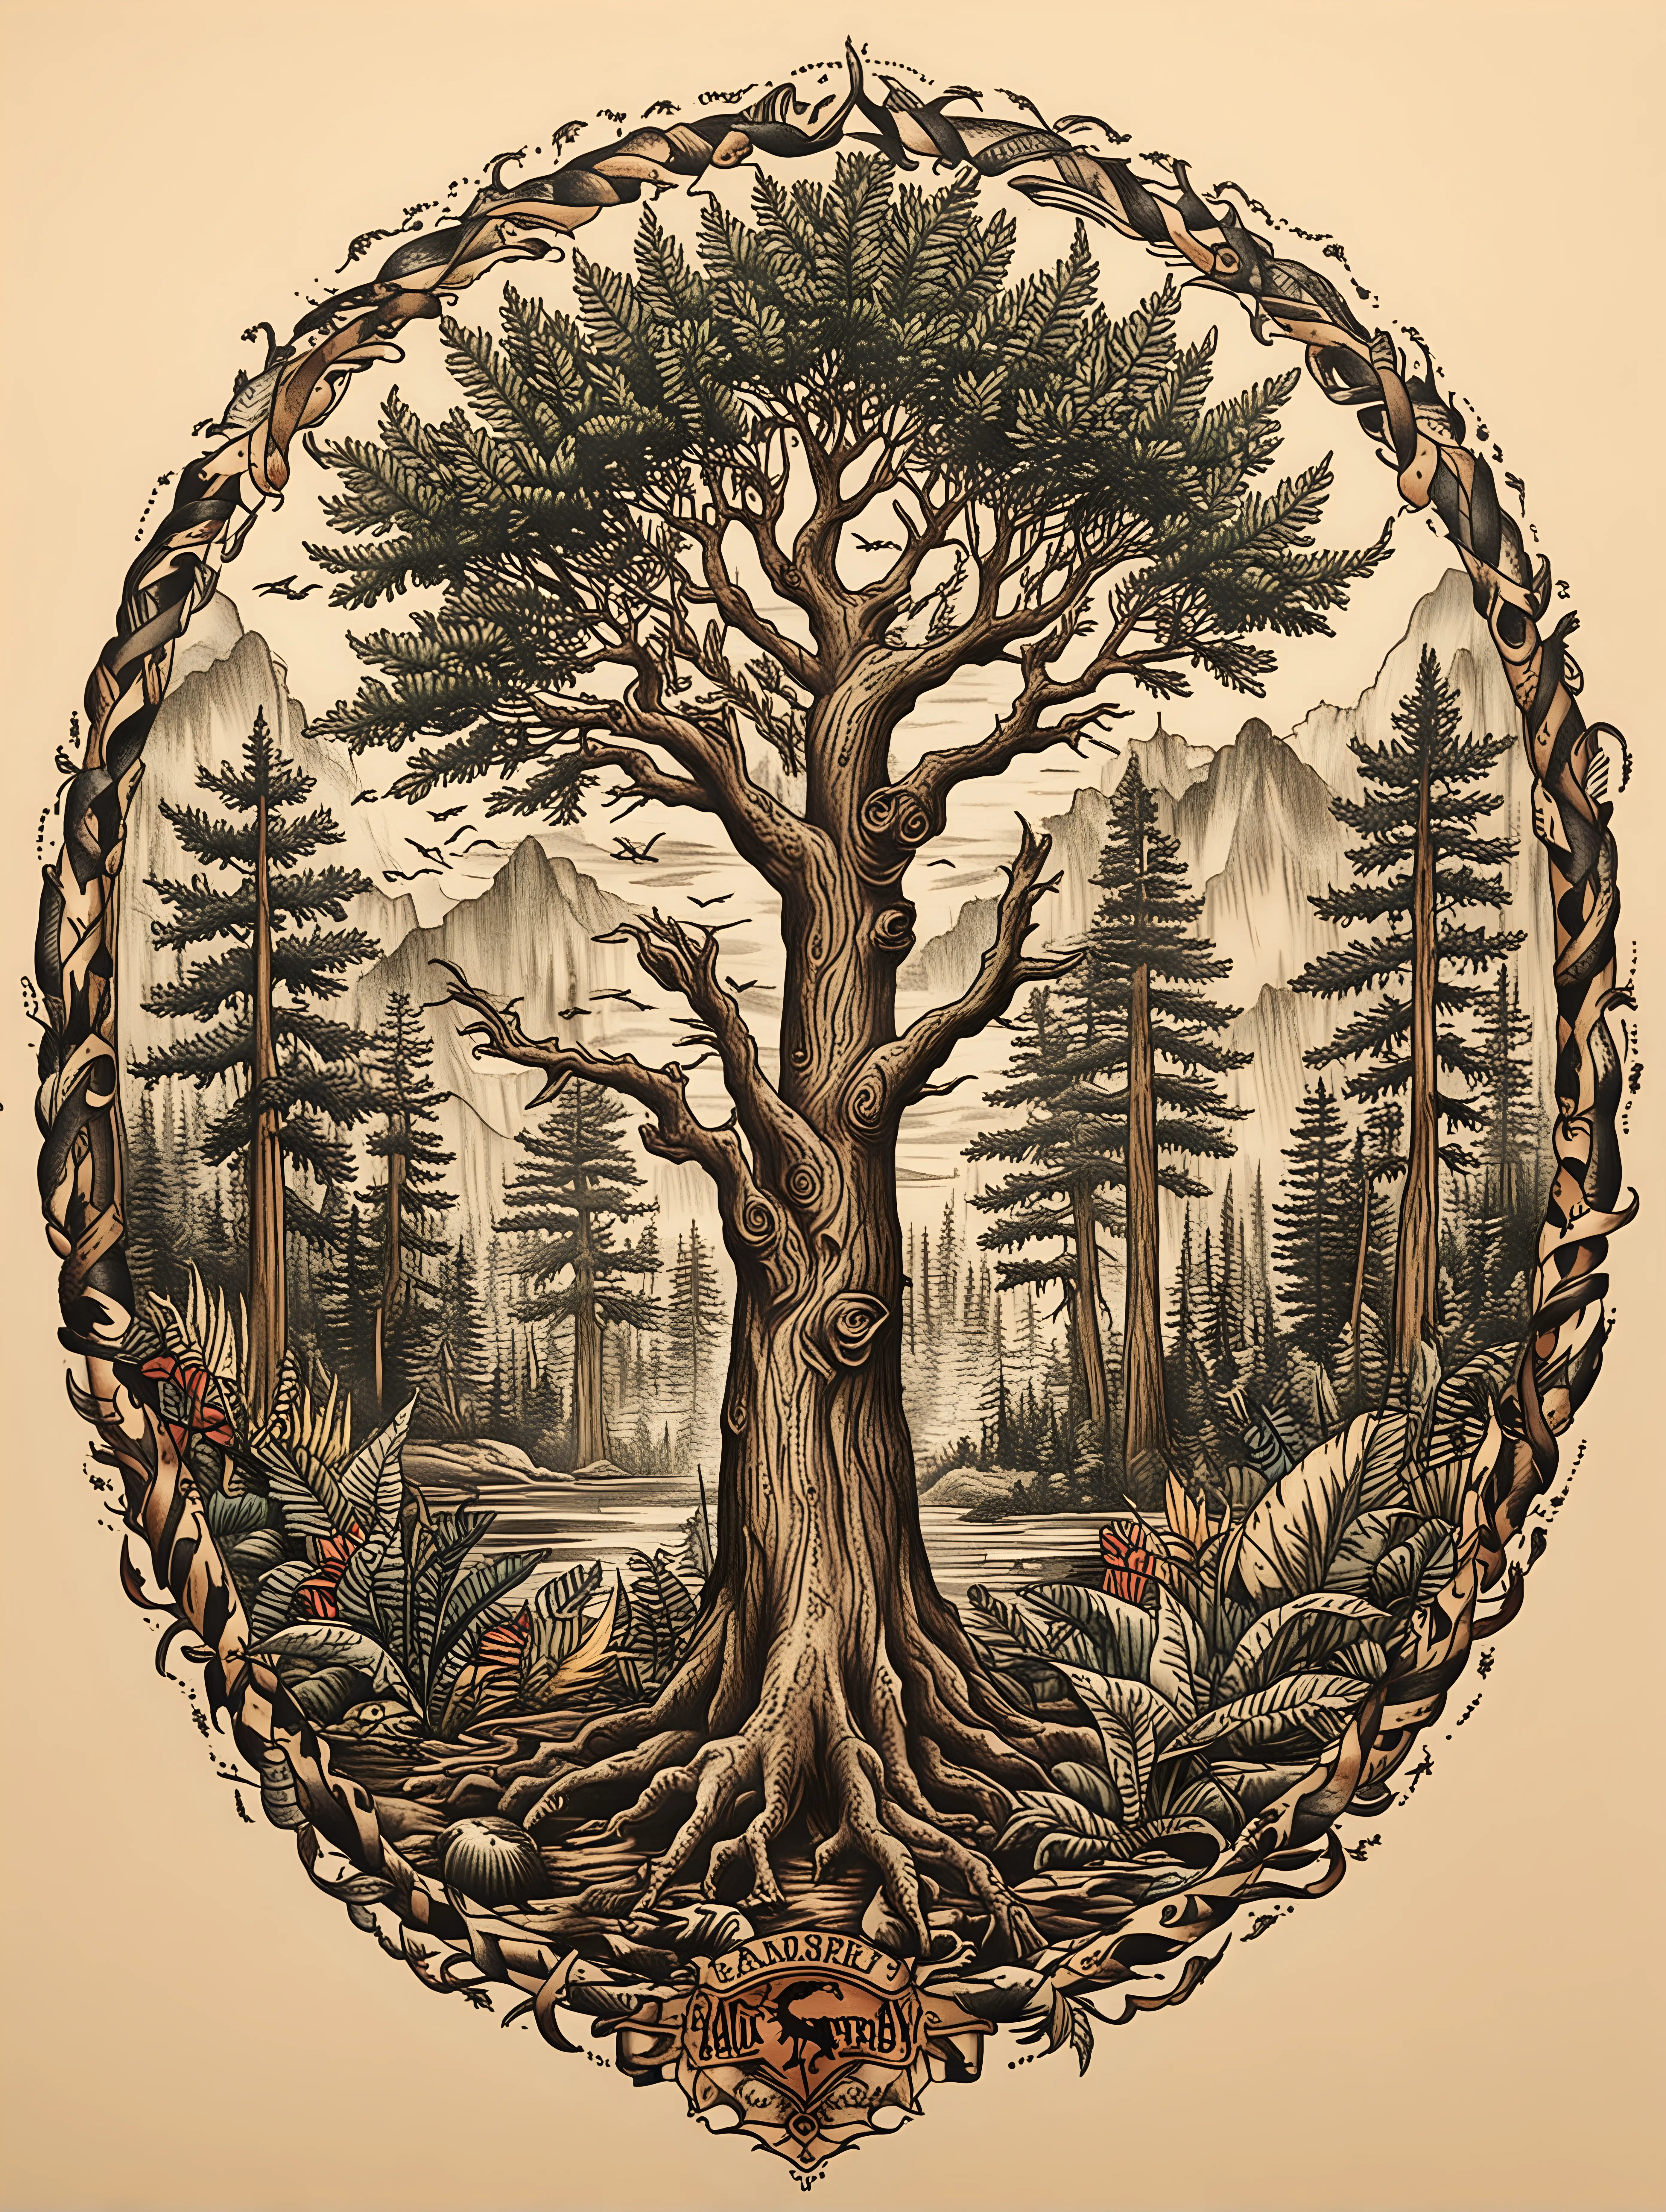 [Americana flash tattoo drawing of jurassic trees] in the style of Sailor Jerry